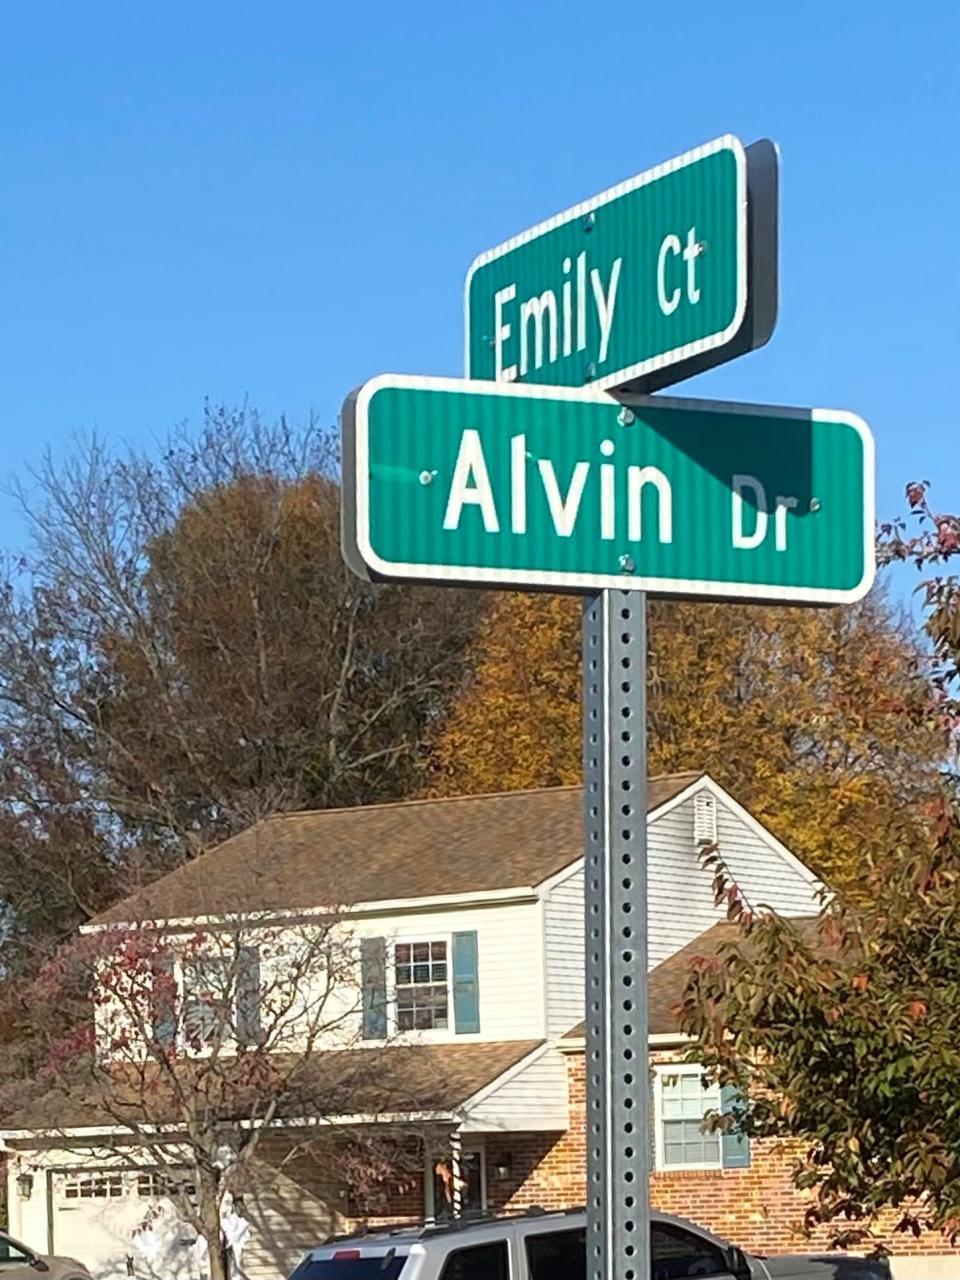 Salem Woods residents said they were enjoying Halloween when they heard several shots near Alvin Drive and Emily Court resulting in three people being wounded by gunfire.